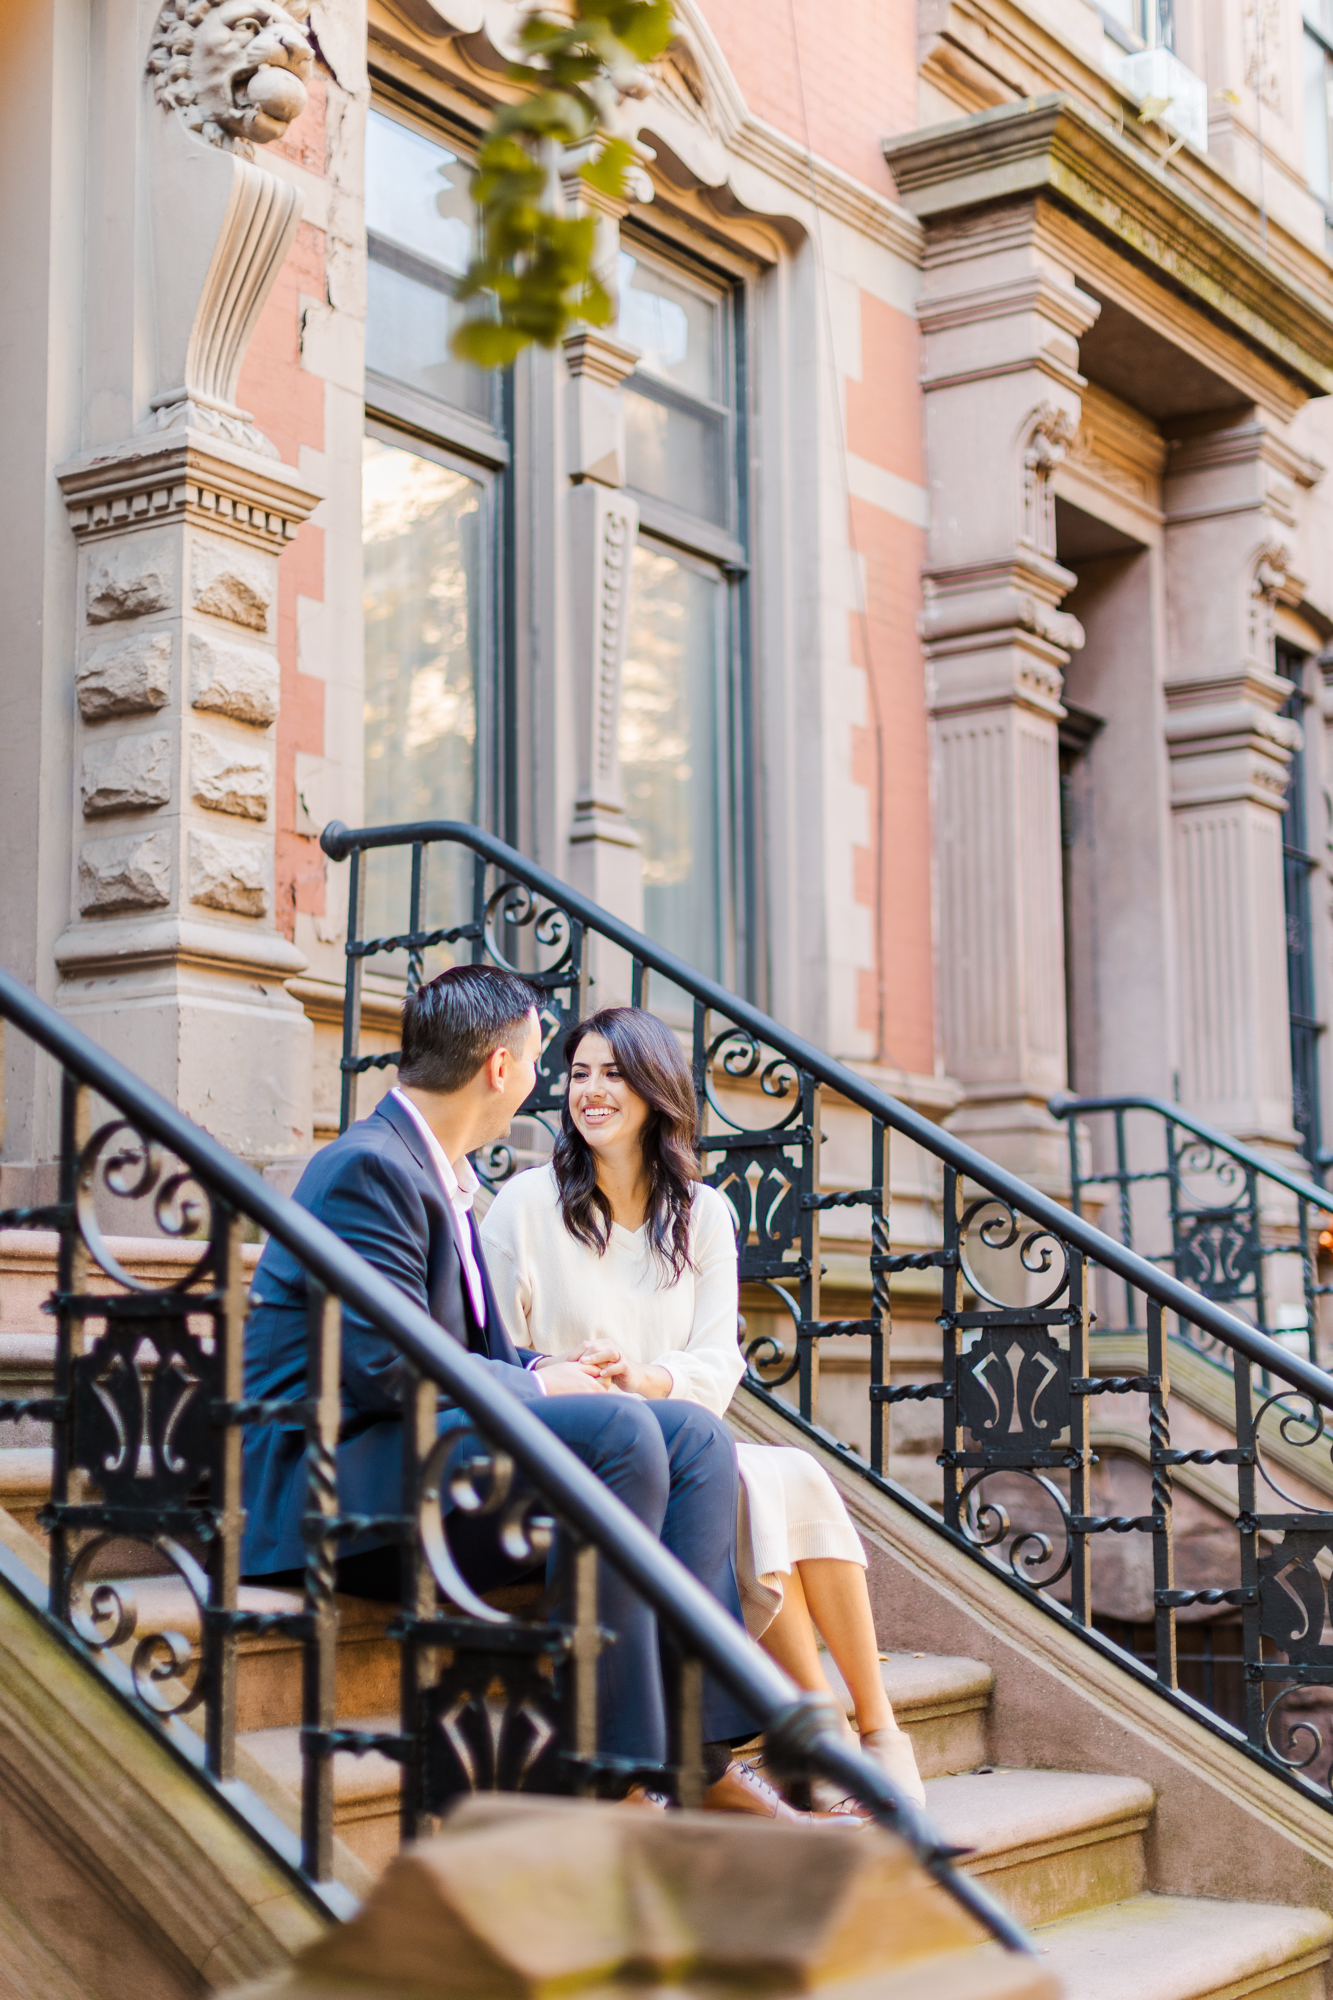 Fabulous Upper West Side Engagement Photo Shoot in NYC